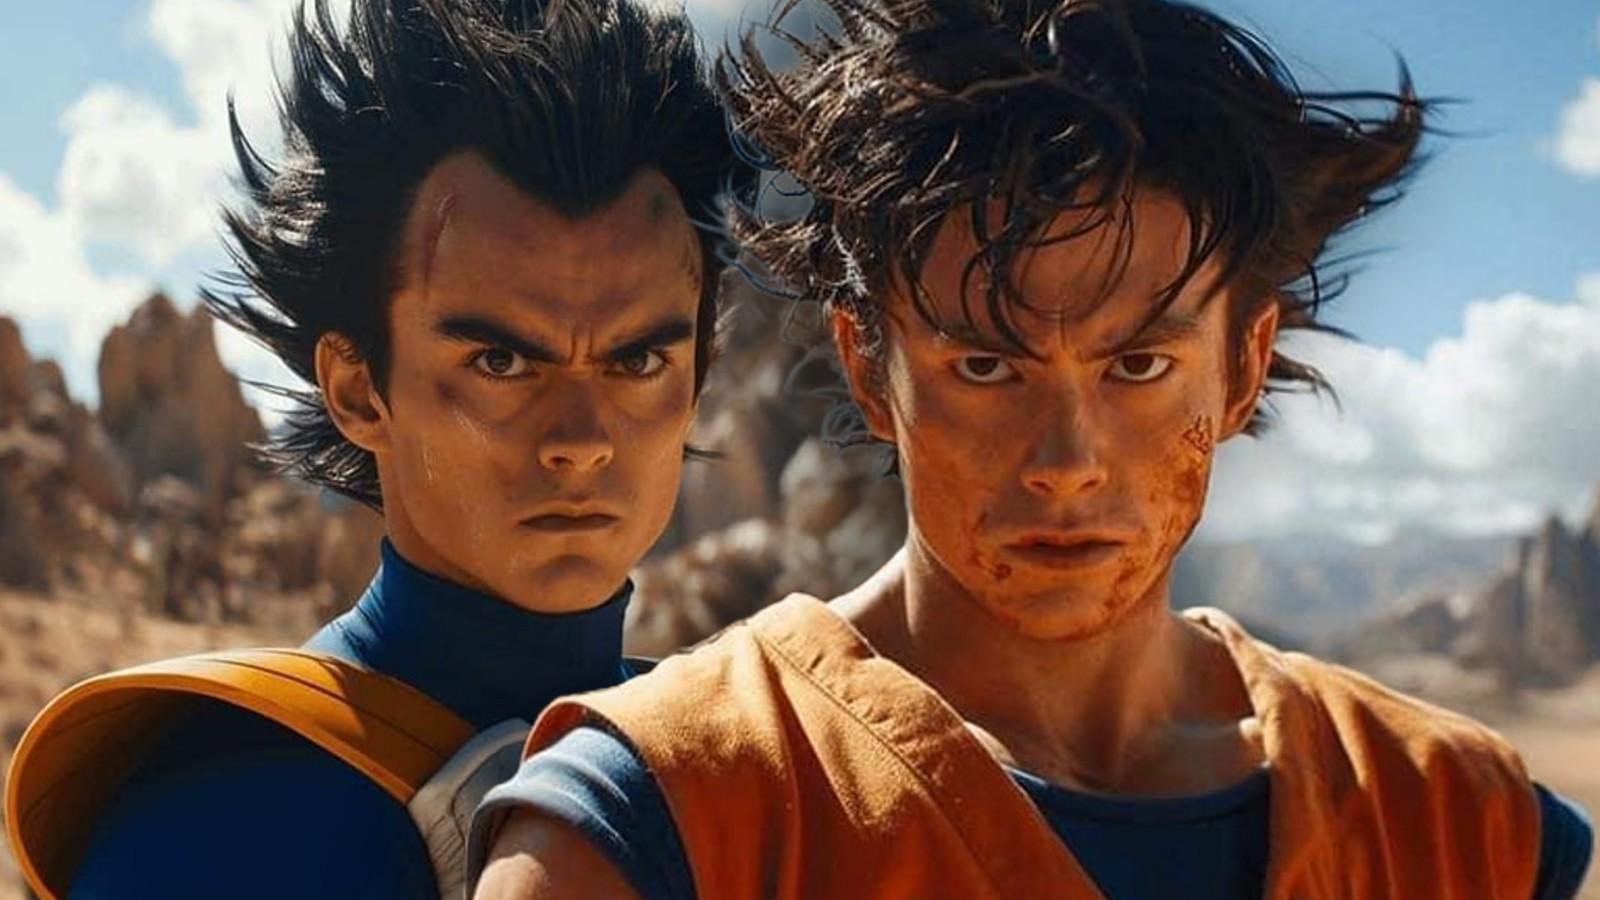 Fake images of Vegeta and Goku in a live-action Dragon Ball Z movie